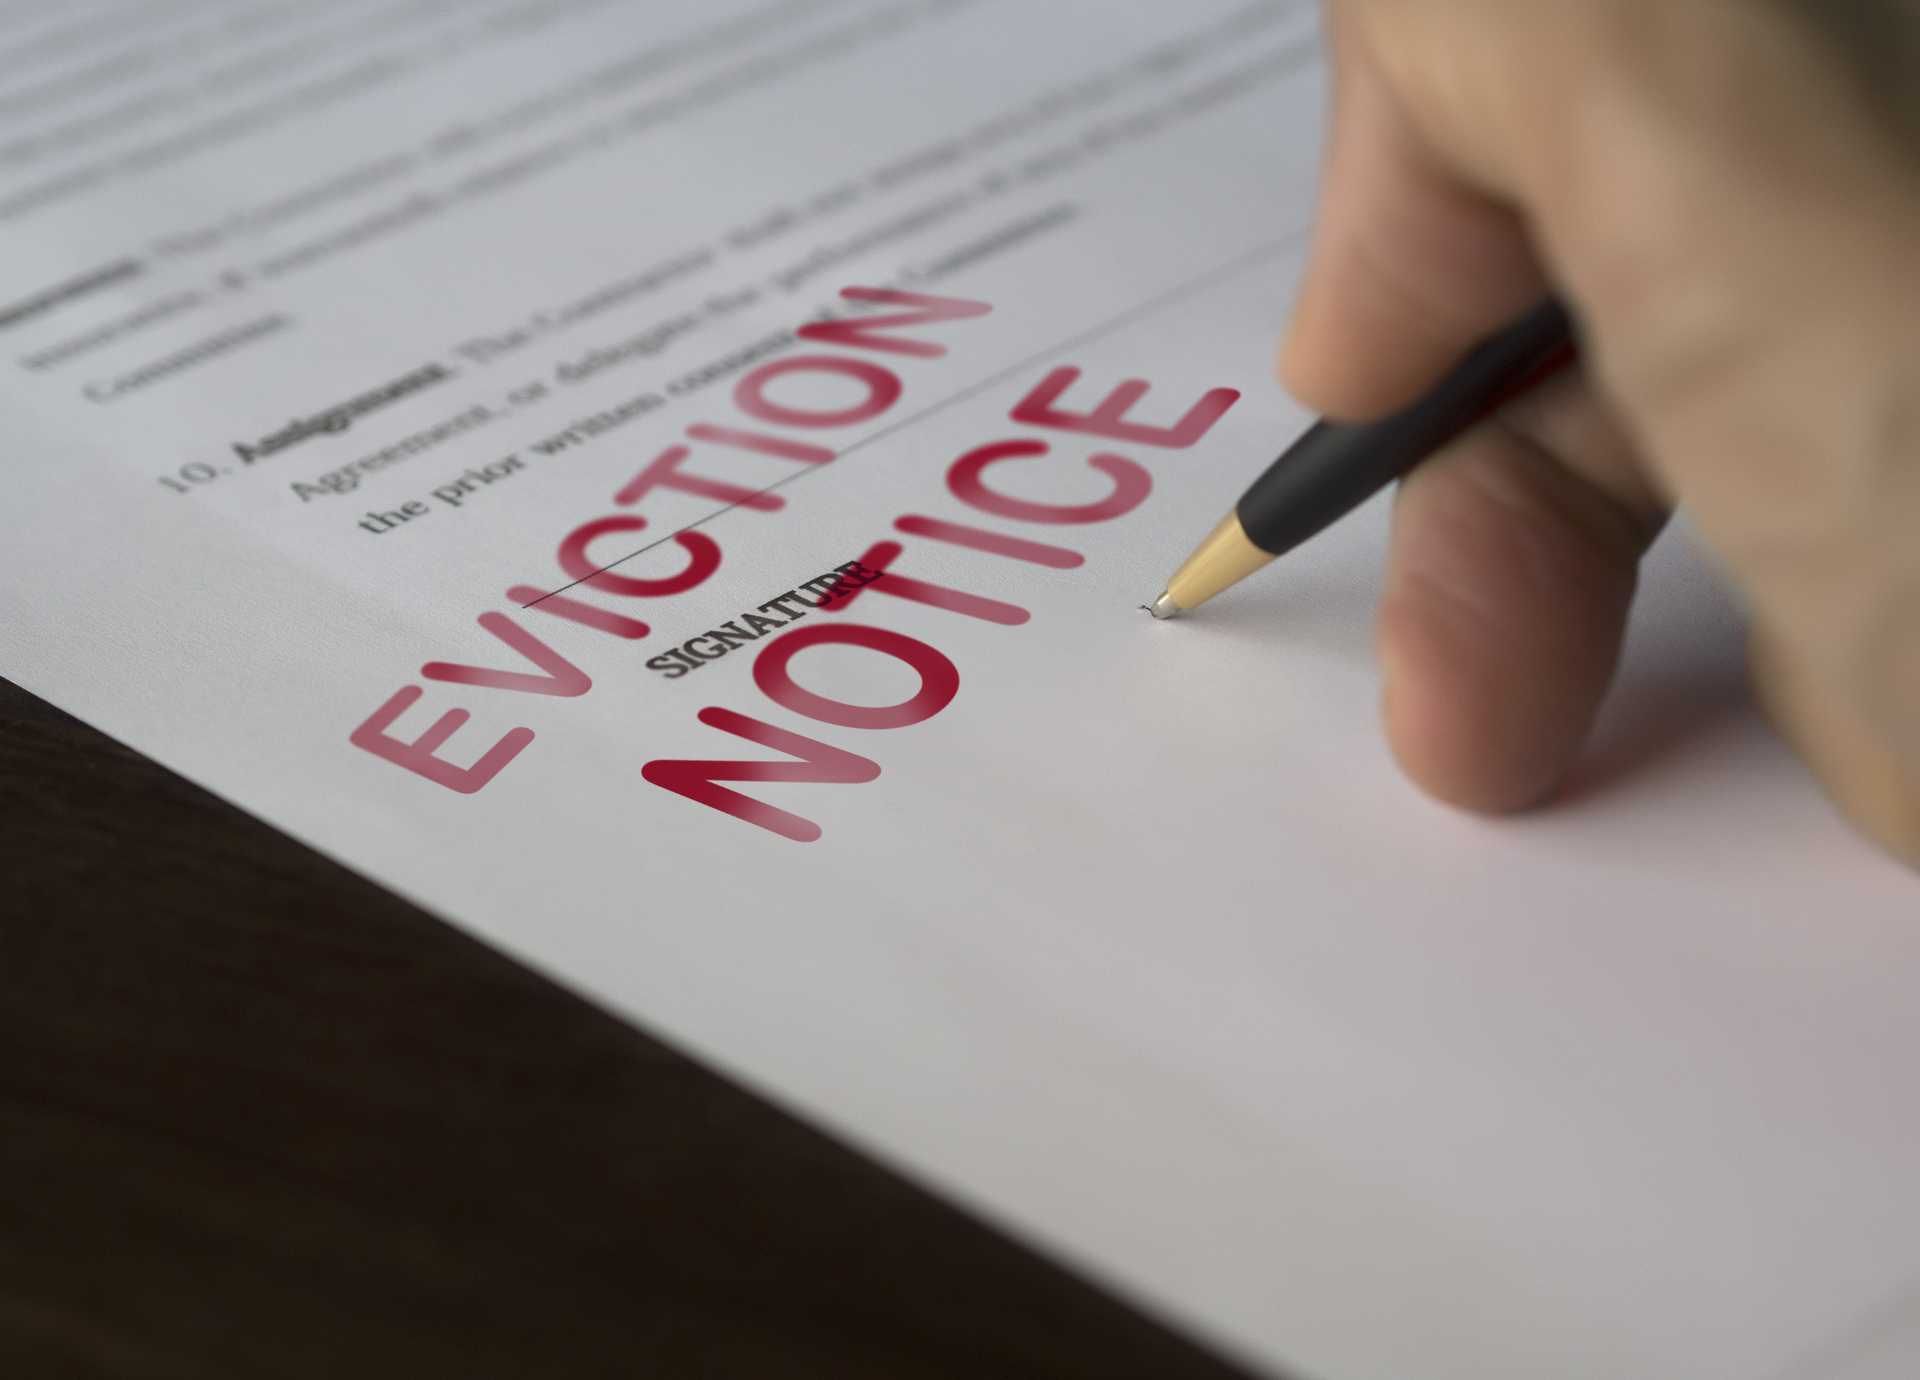 Scottish eviction reforms – what is the latest?